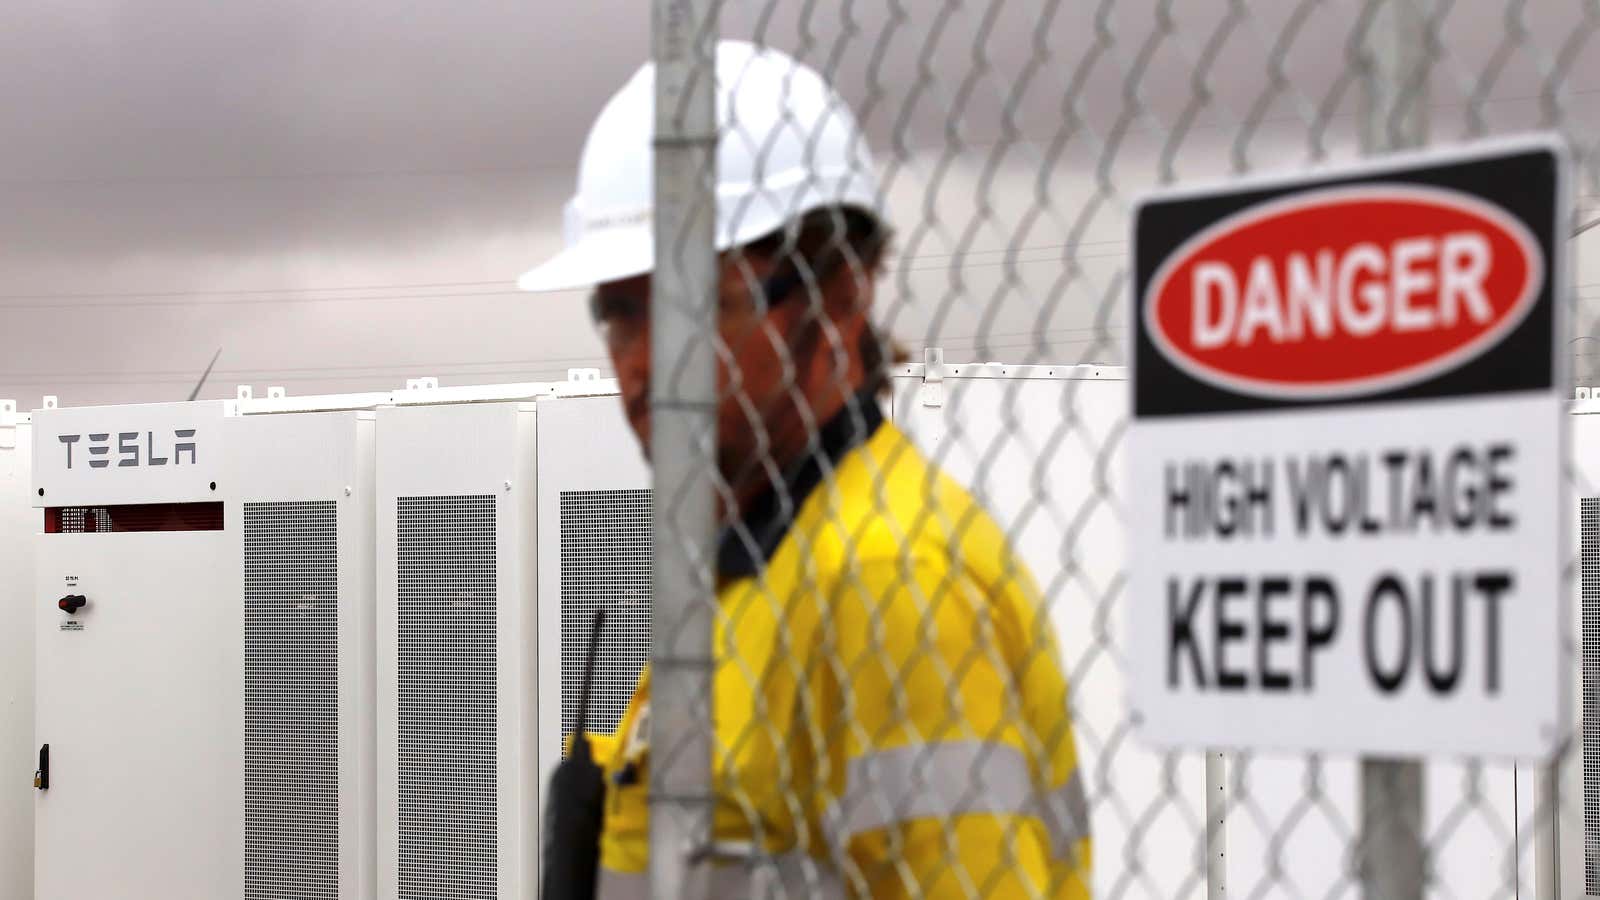 Tesla’s battery installations are a danger to coal- and gas-fired power plants.